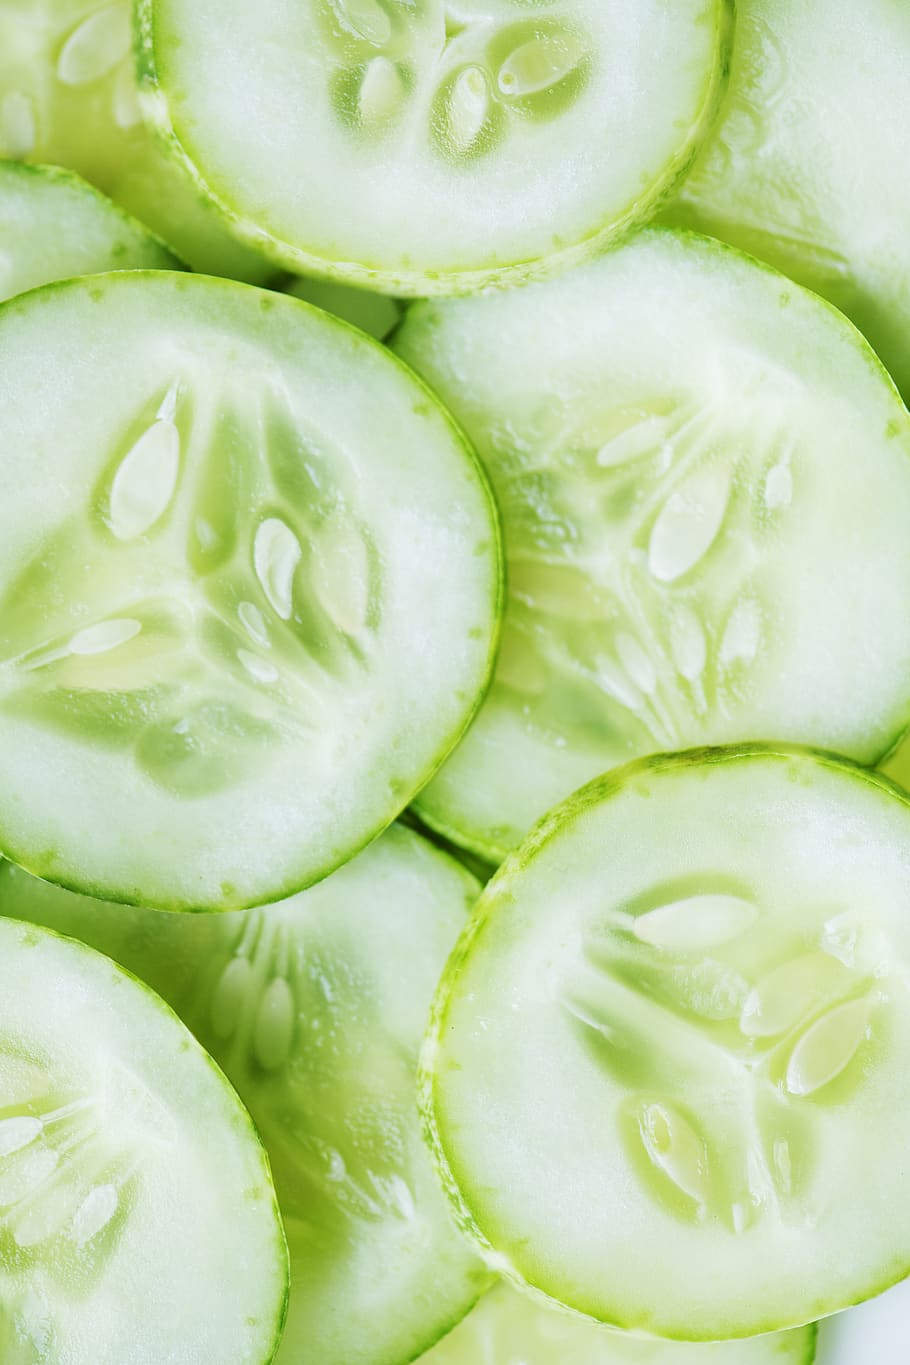 706100 Cucumber Stock Photos Pictures  RoyaltyFree Images  iStock   Cucumber slices Sliced cucumber Cucumber isolated